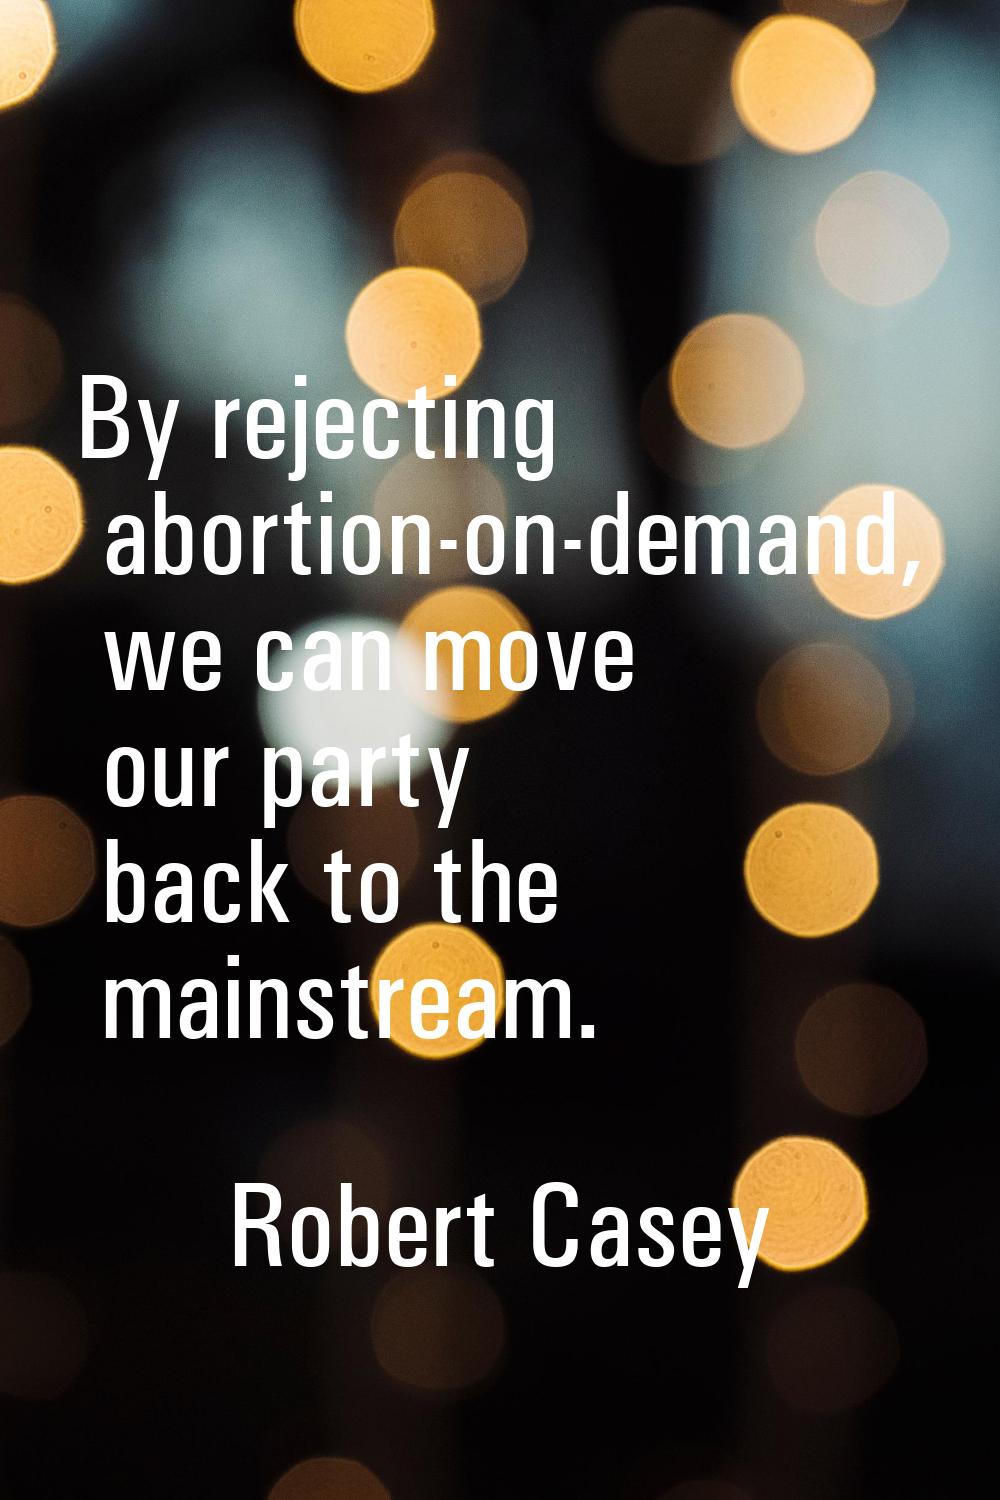 By rejecting abortion-on-demand, we can move our party back to the mainstream.